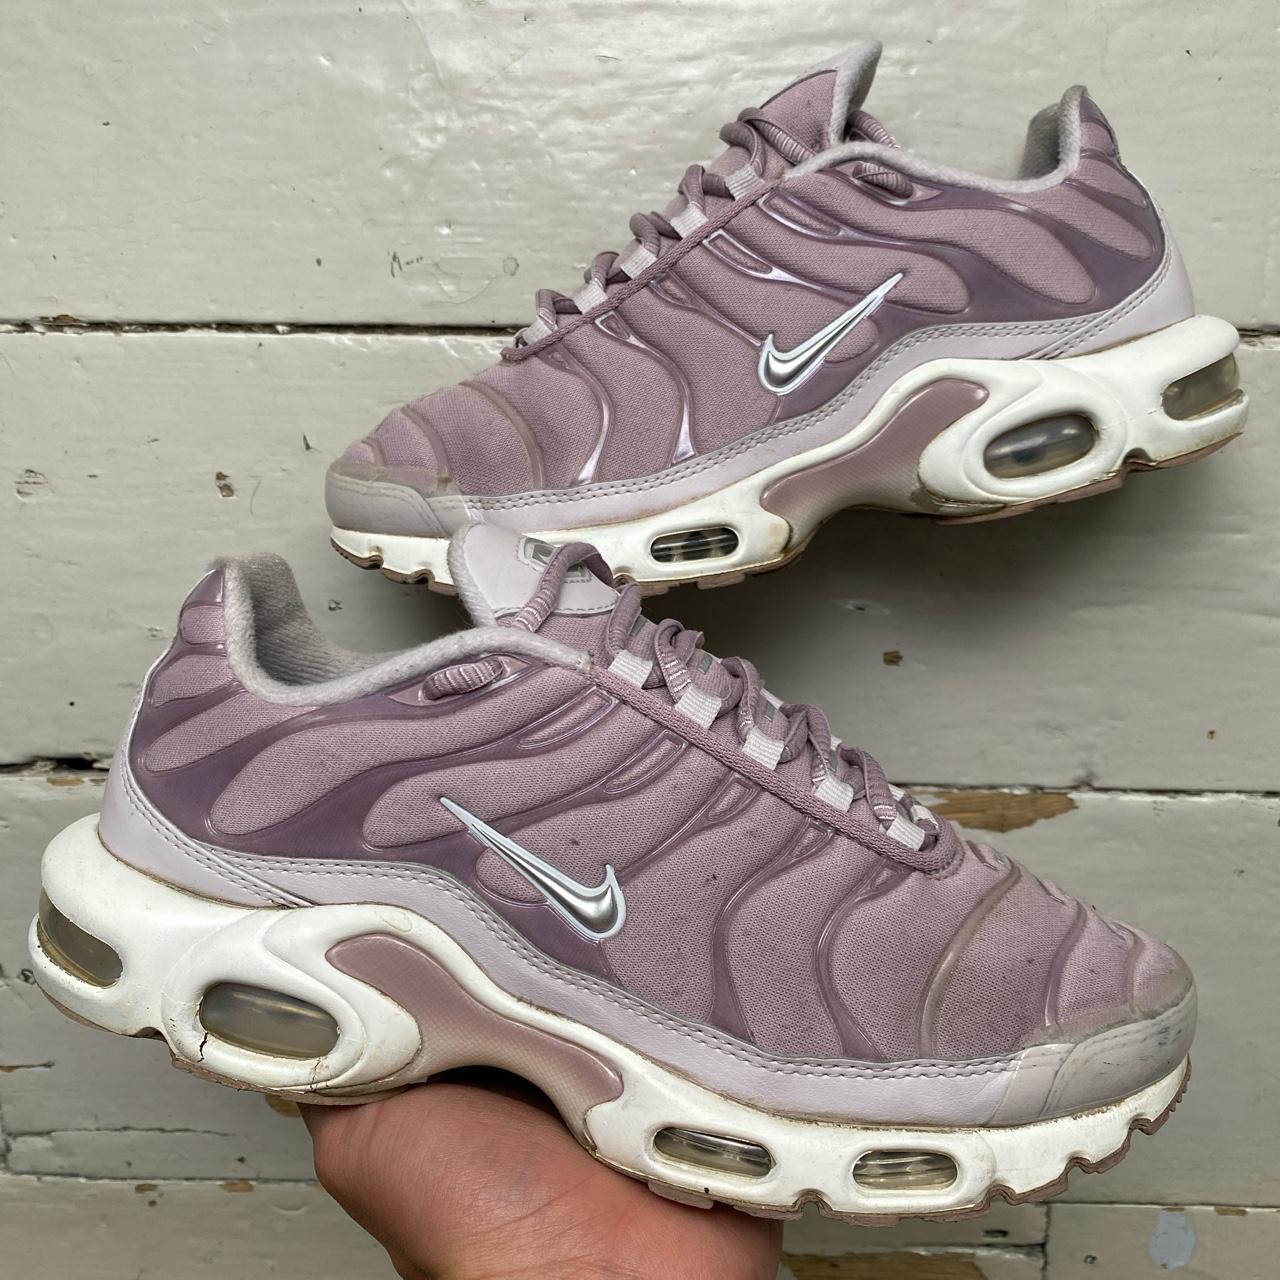 Nike TN Air Max Plus Pink and White